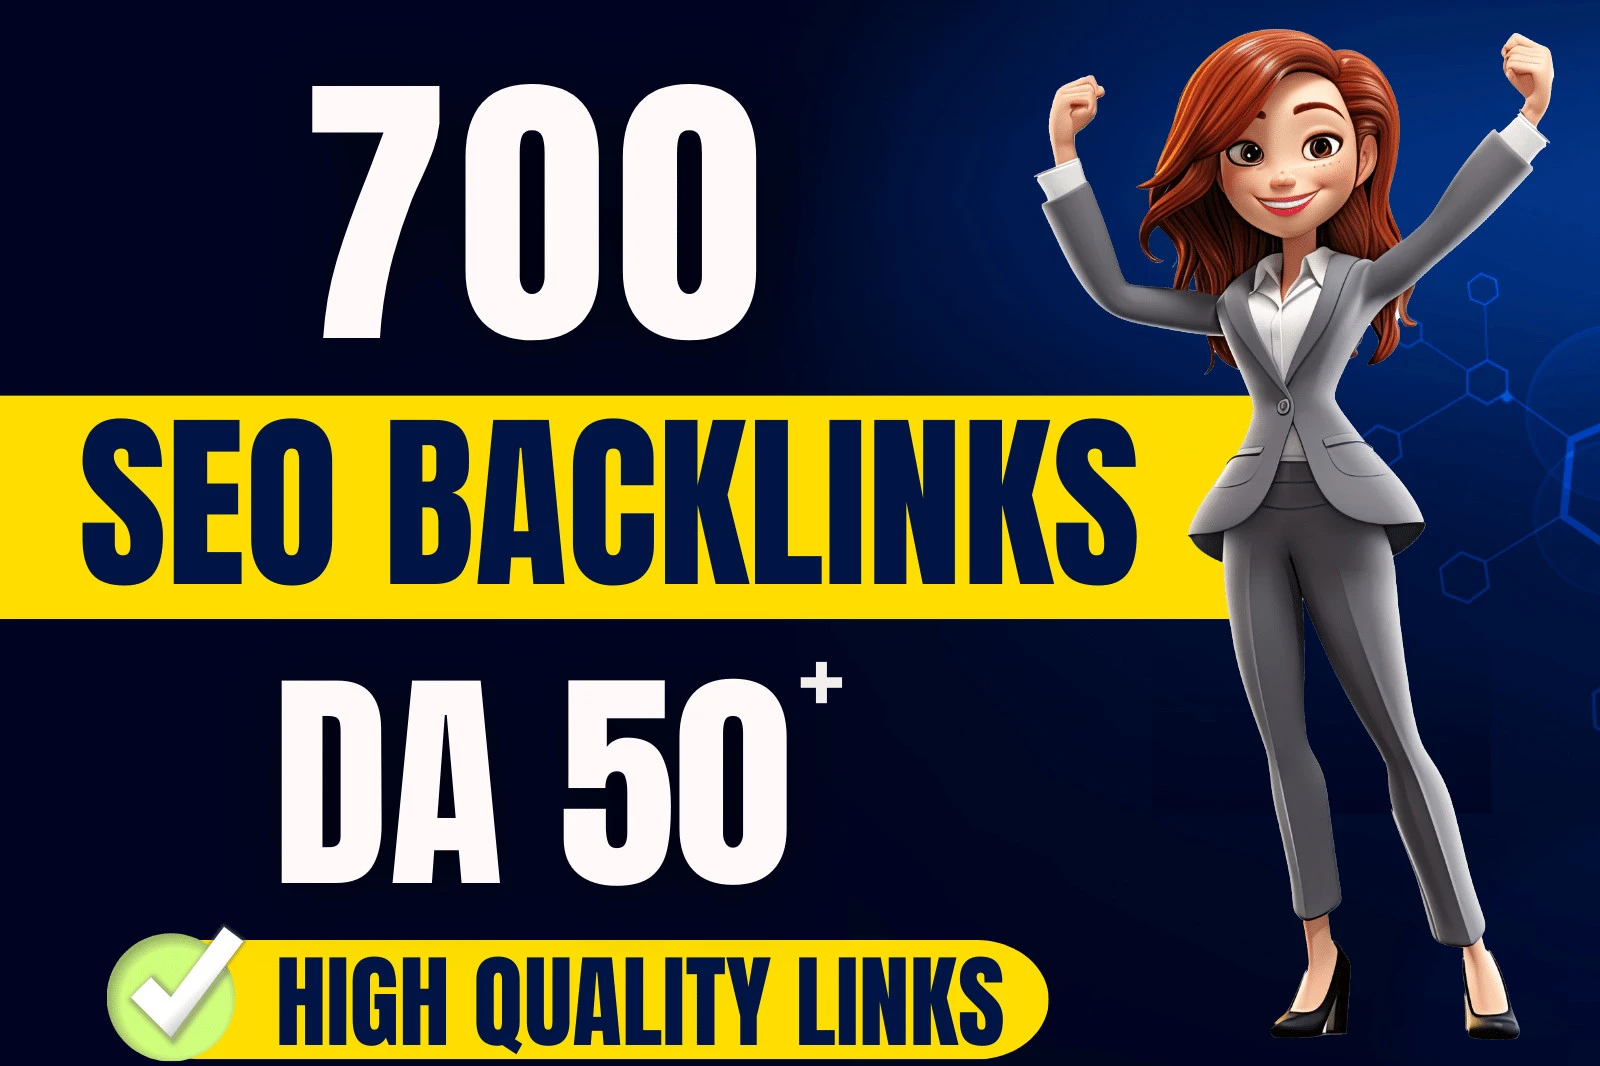 SKYROCKET Manually Create 700 Mix Dofollow SEO Backlinks With white hat technique